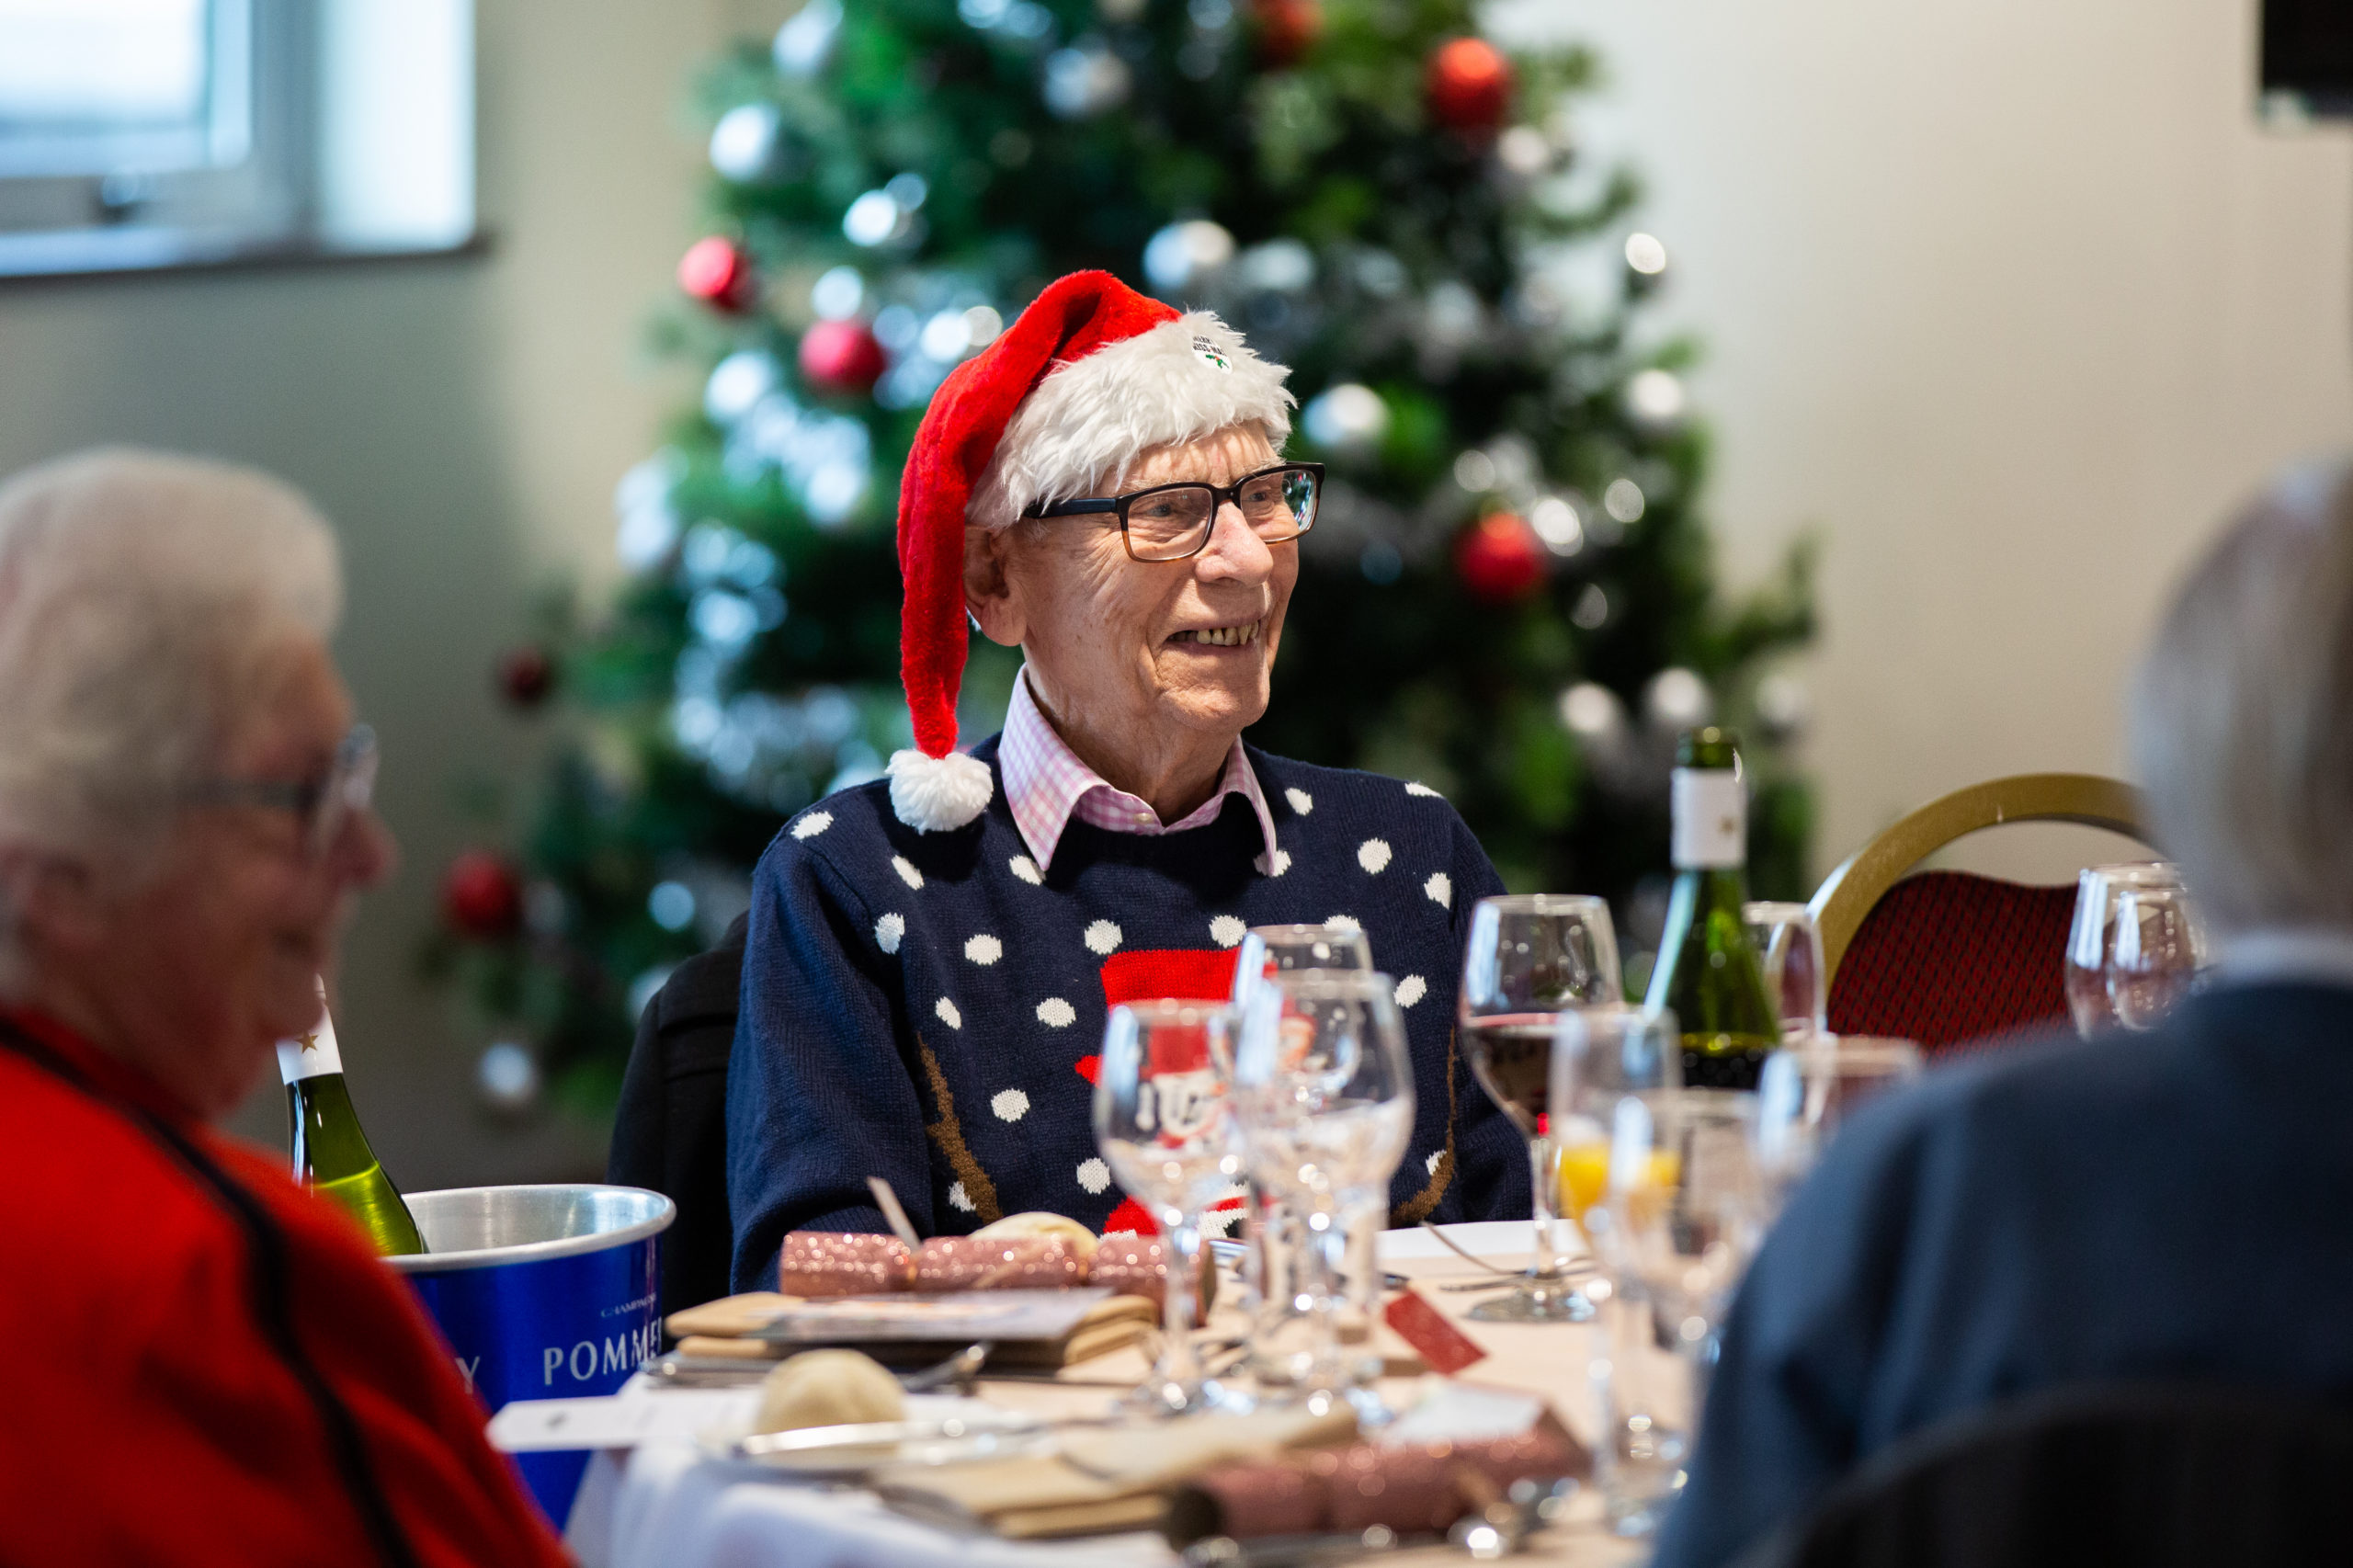 Retired Staff Christmas Lunch